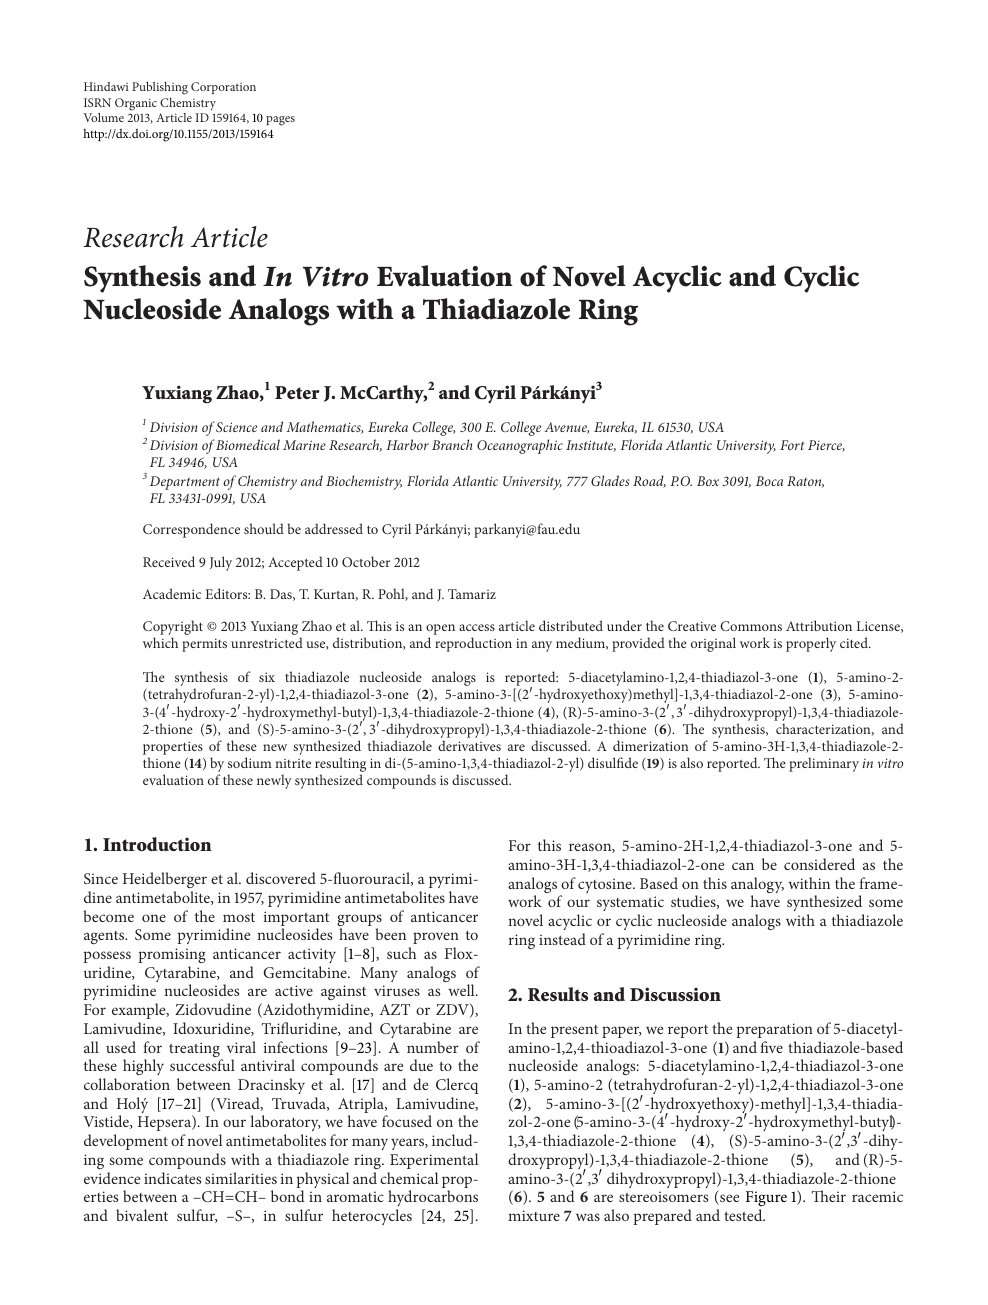 Synthesis and Biological Evaluation of Enantiomerically Pure (R